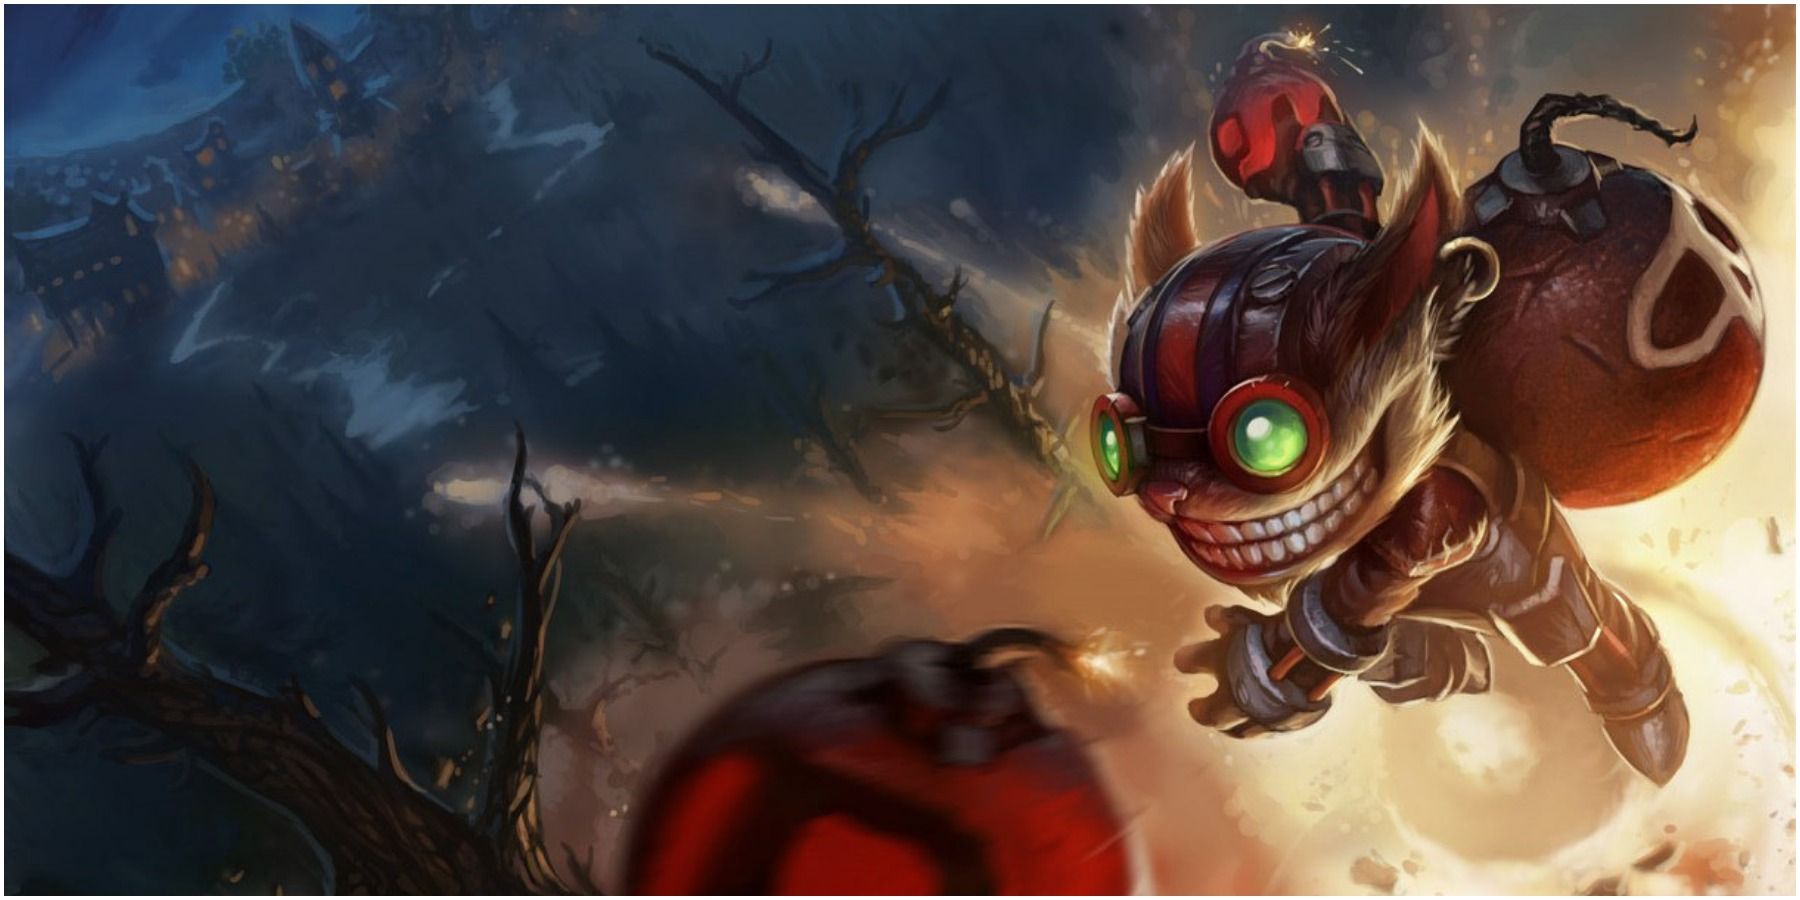 Ziggs Tossing One Of His Bombs